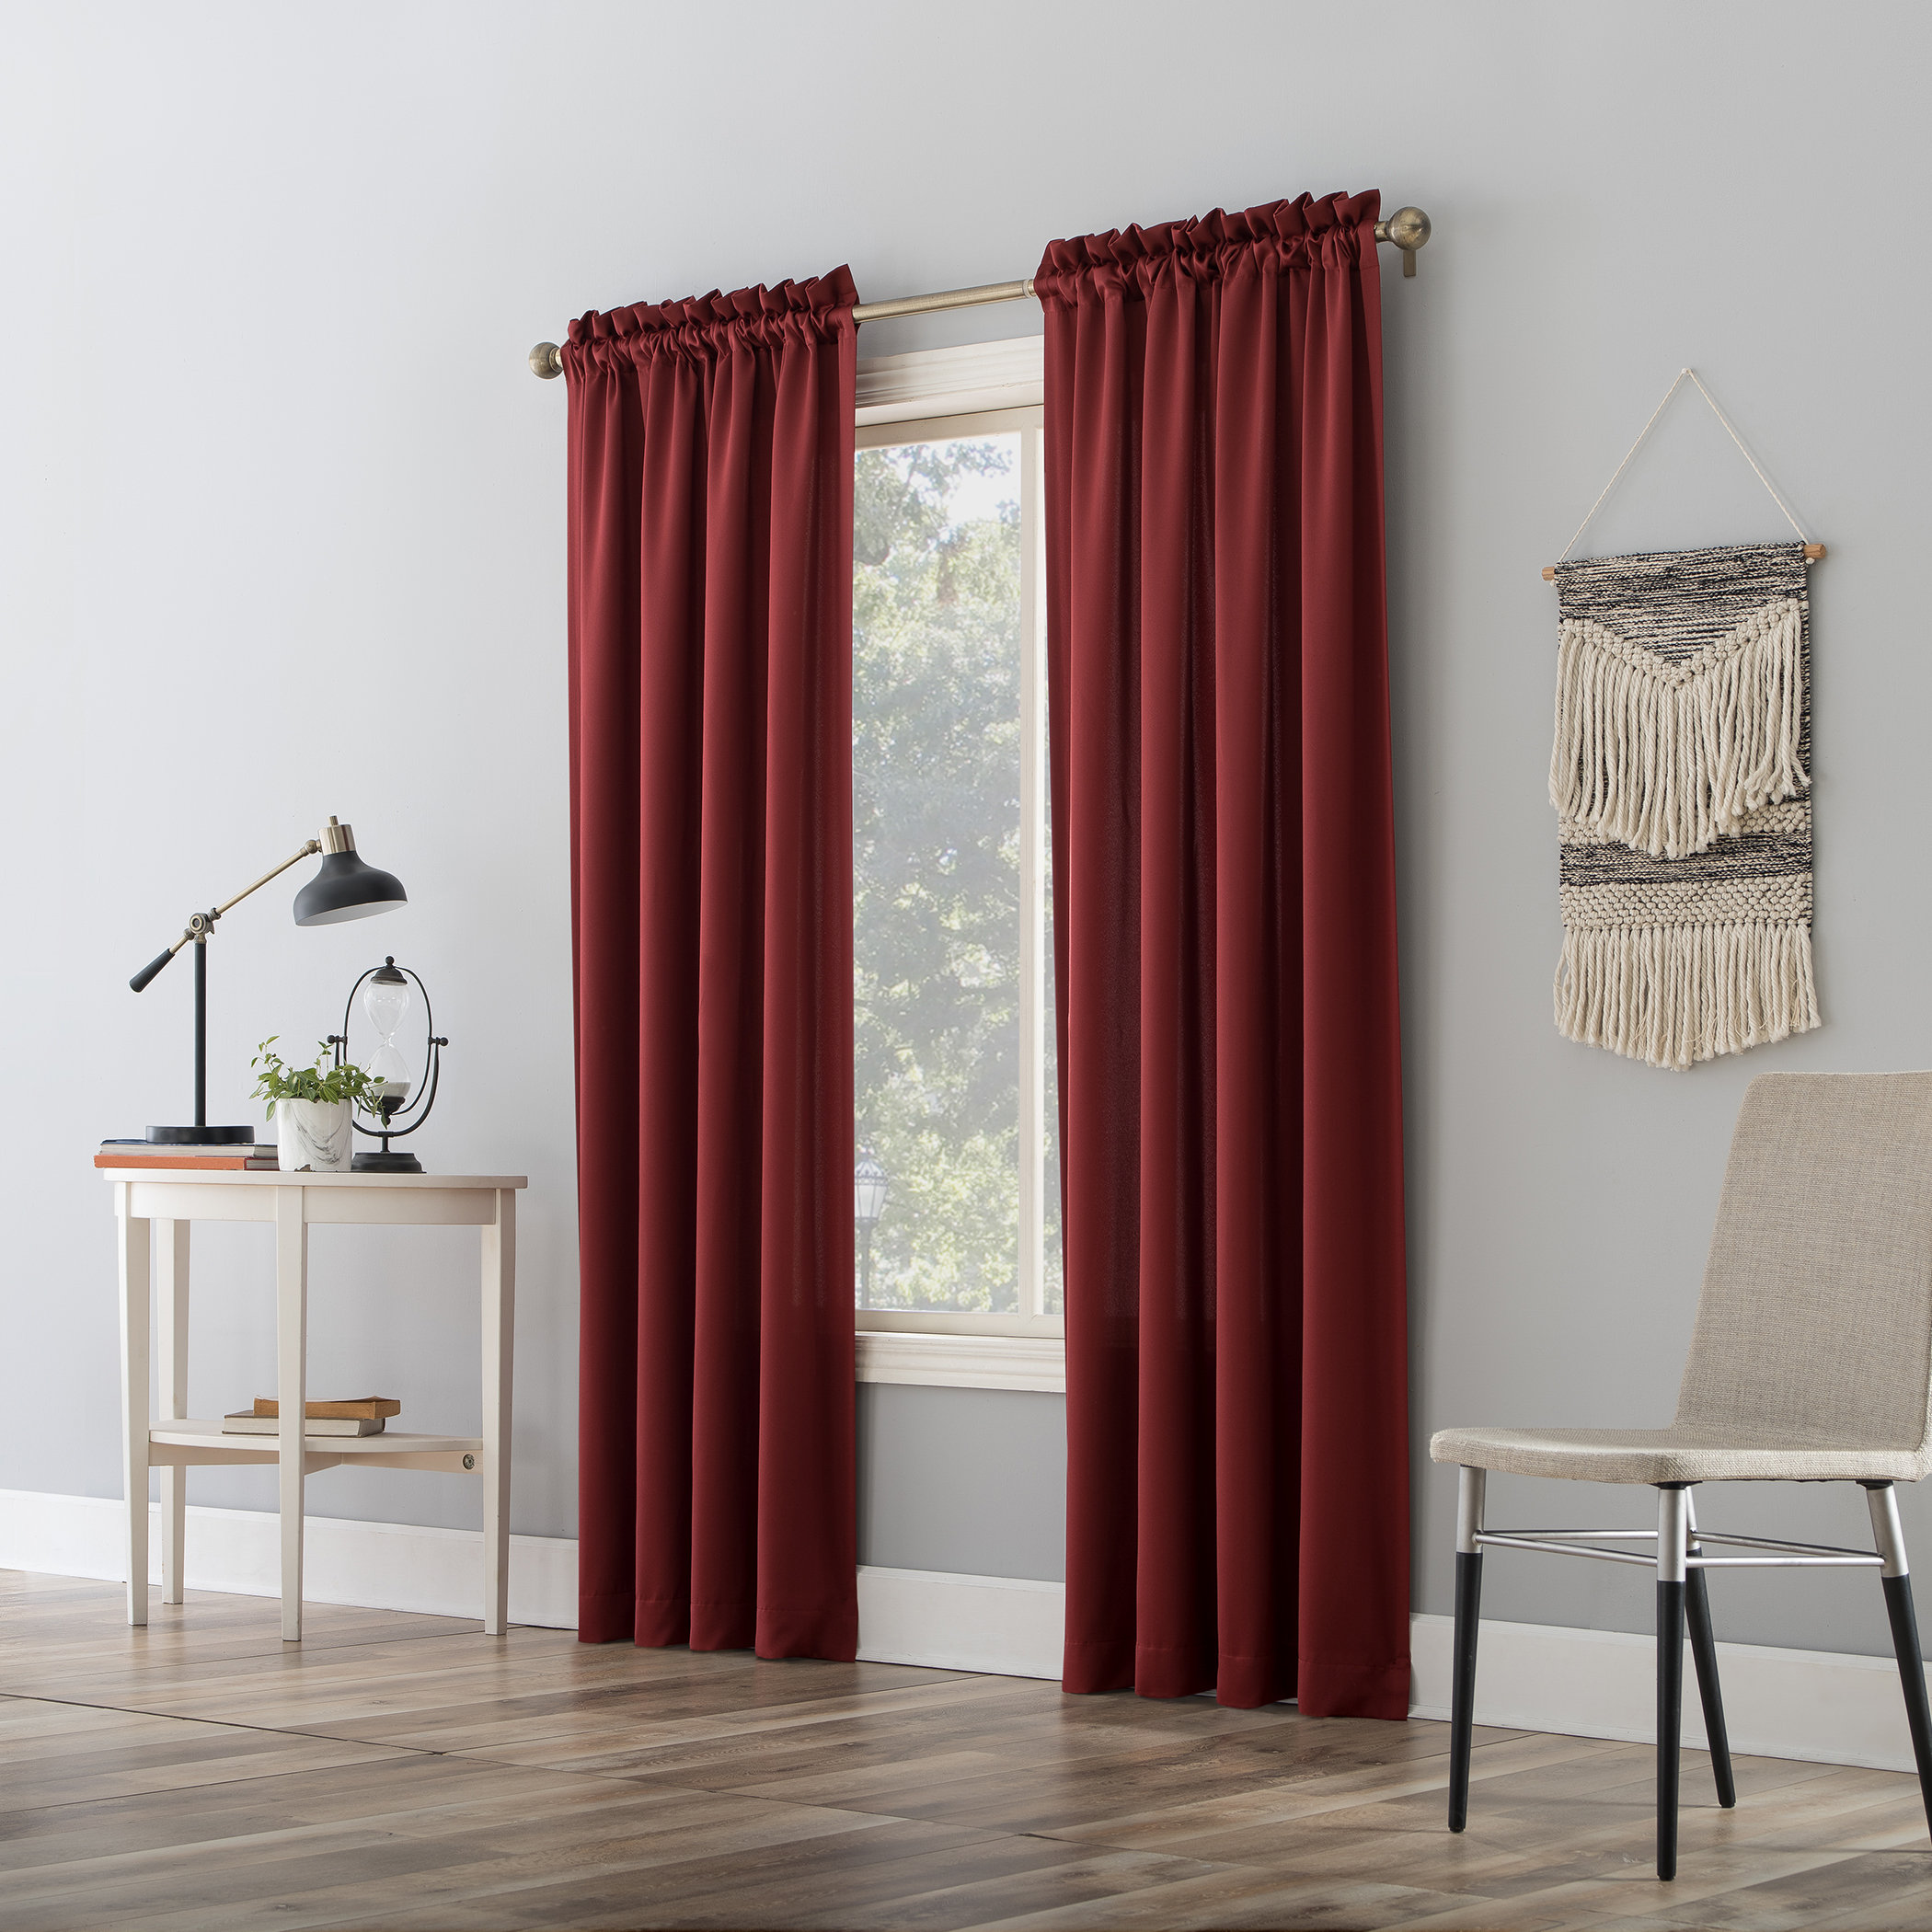 Wayfair | Orange & Red Curtains & Drapes You'll Love in 2023